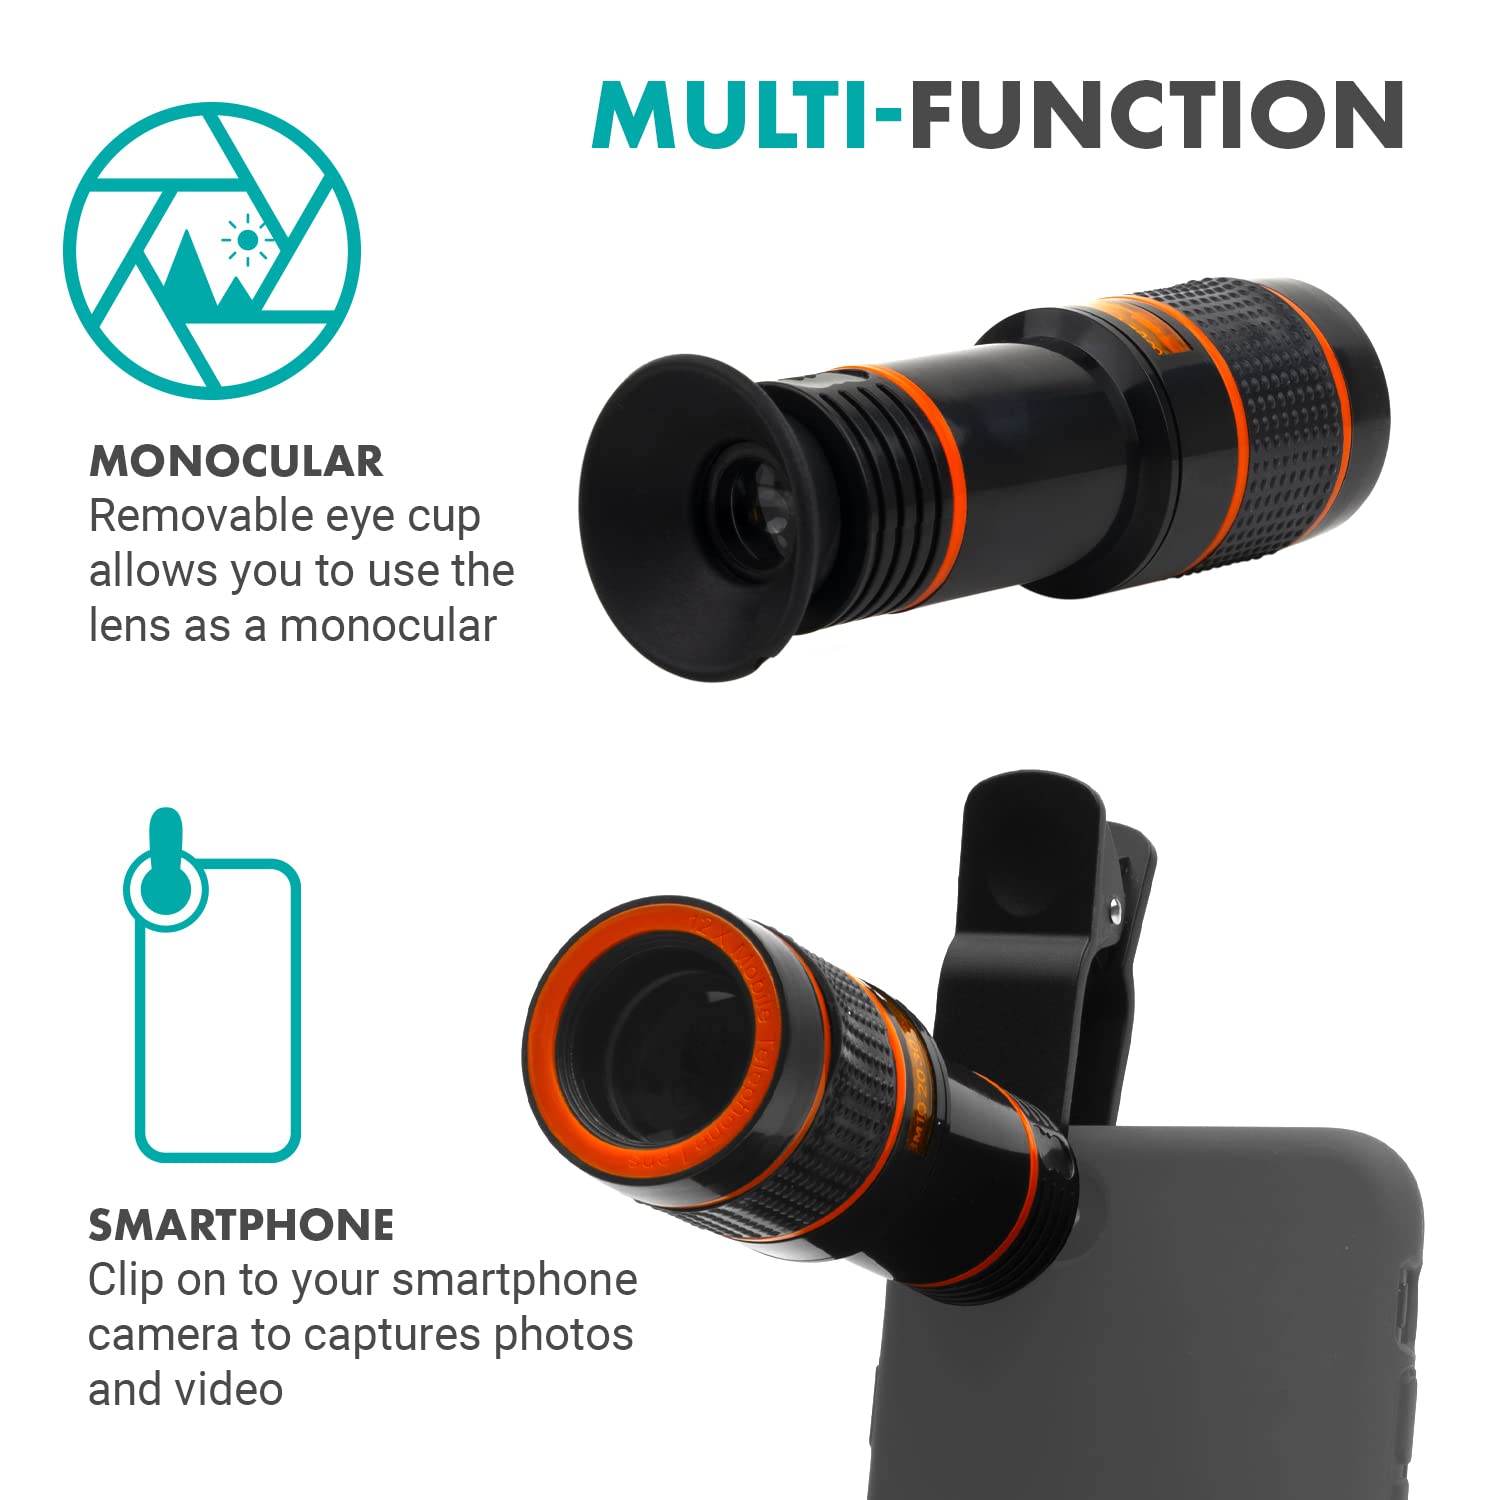 Movo SPL-ST 12X Zoom Telescope Smartphone Lens Adapter and Monocular- Clip-on Telephoto Lens for Phone with Removable Monocular Eye Cup- Telescope and Phone Camera Lens for Photography and Videography  - Very Good